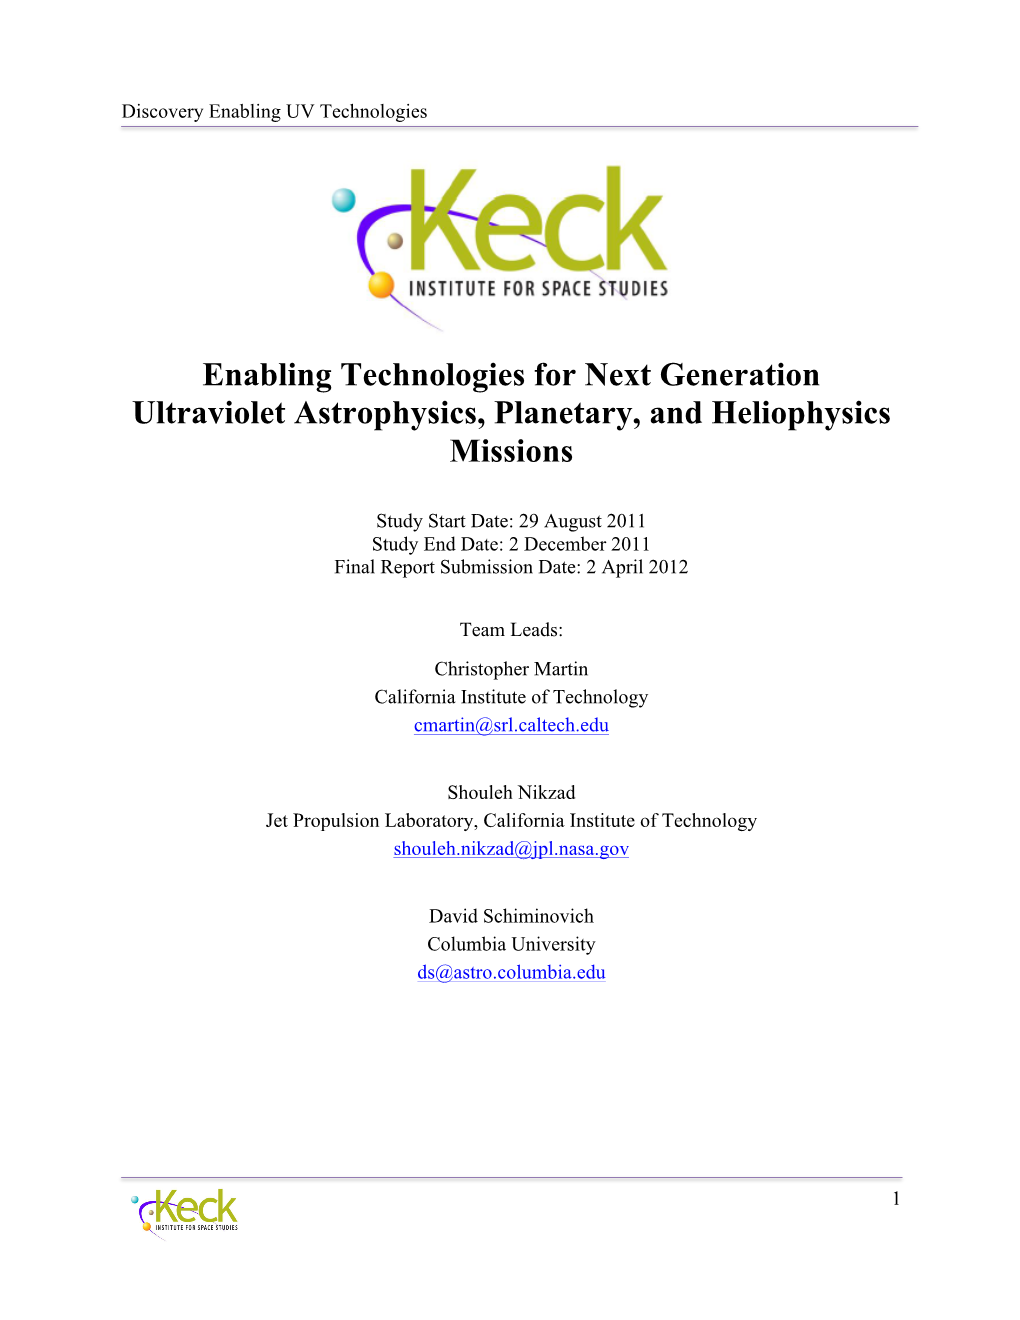 Enabling Technologies for Next Generation Ultraviolet Astrophysics, Planetary, and Heliophysics Missions